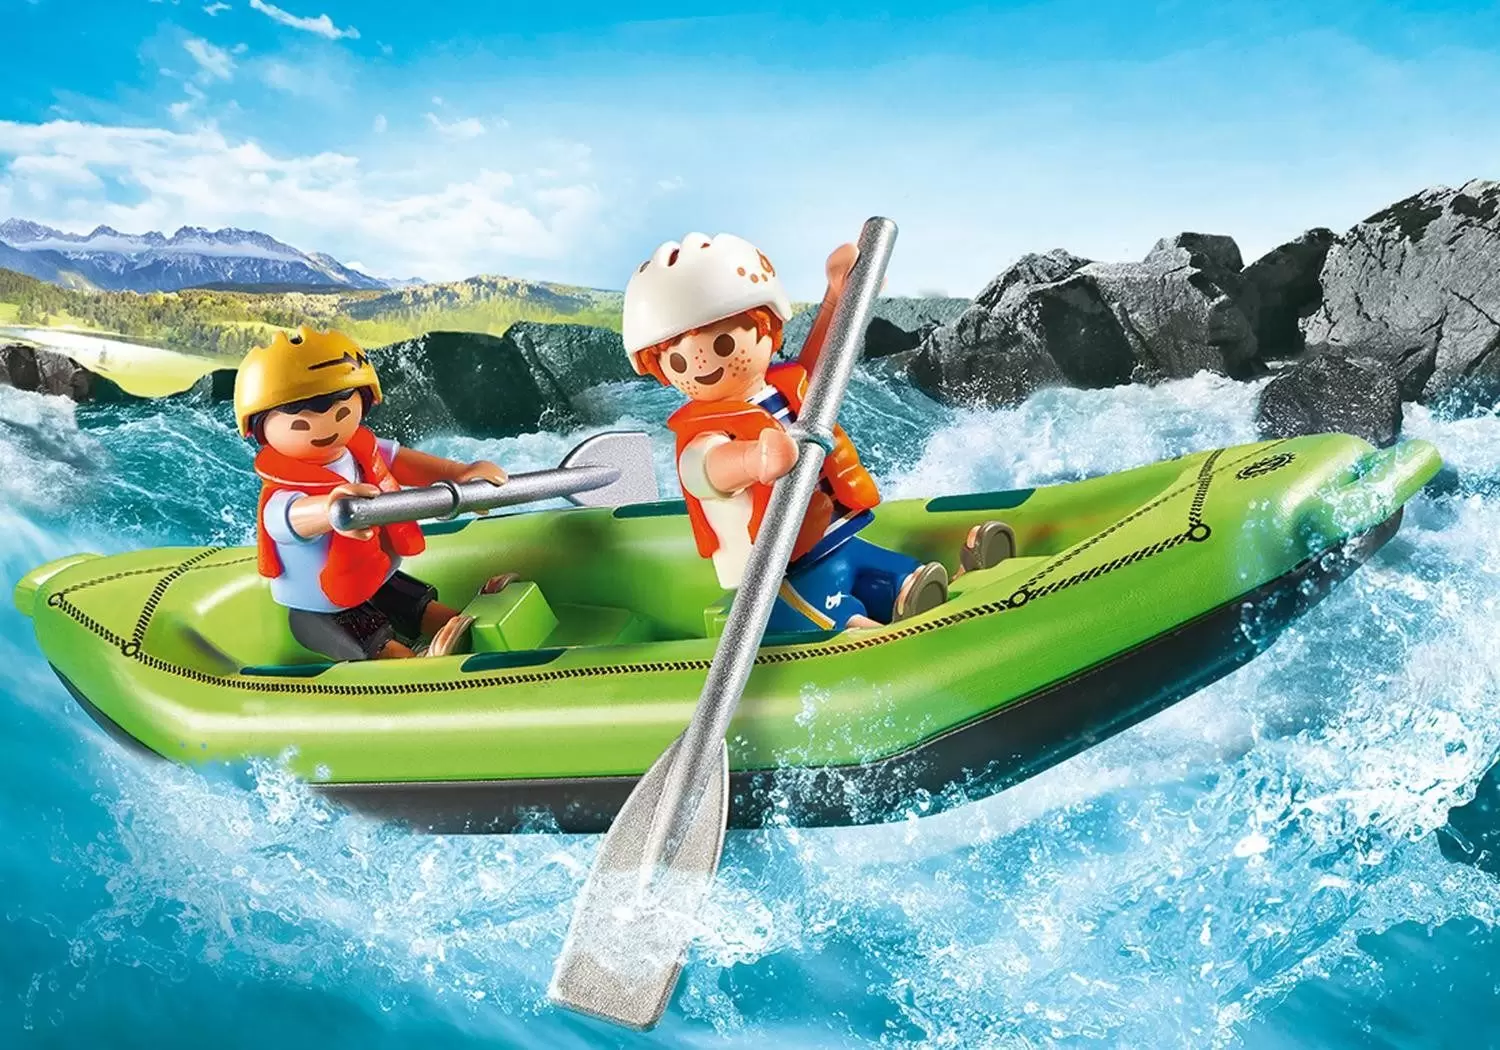 Playmobil on Hollidays - Whitewater Rafters